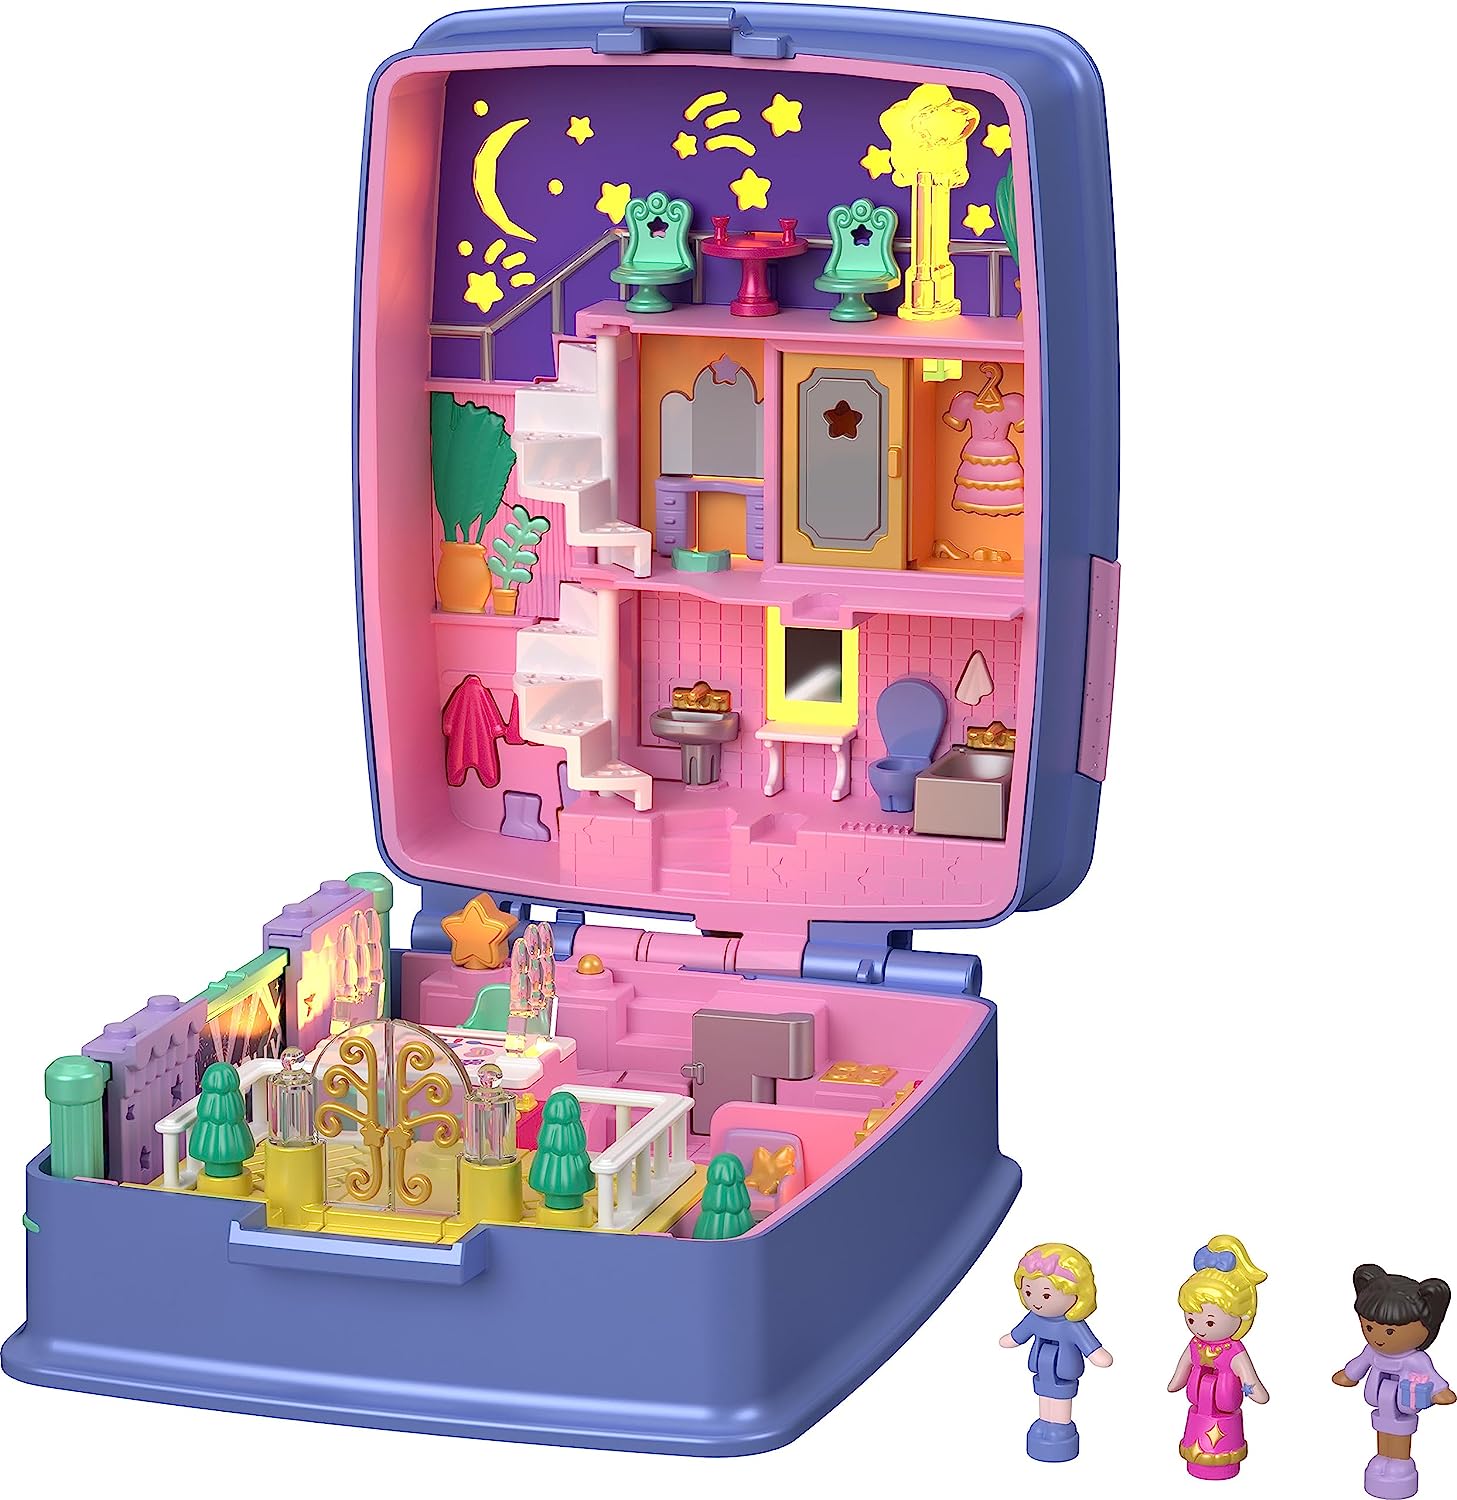 Mattel Polly Pocket Monster High Compact Playset